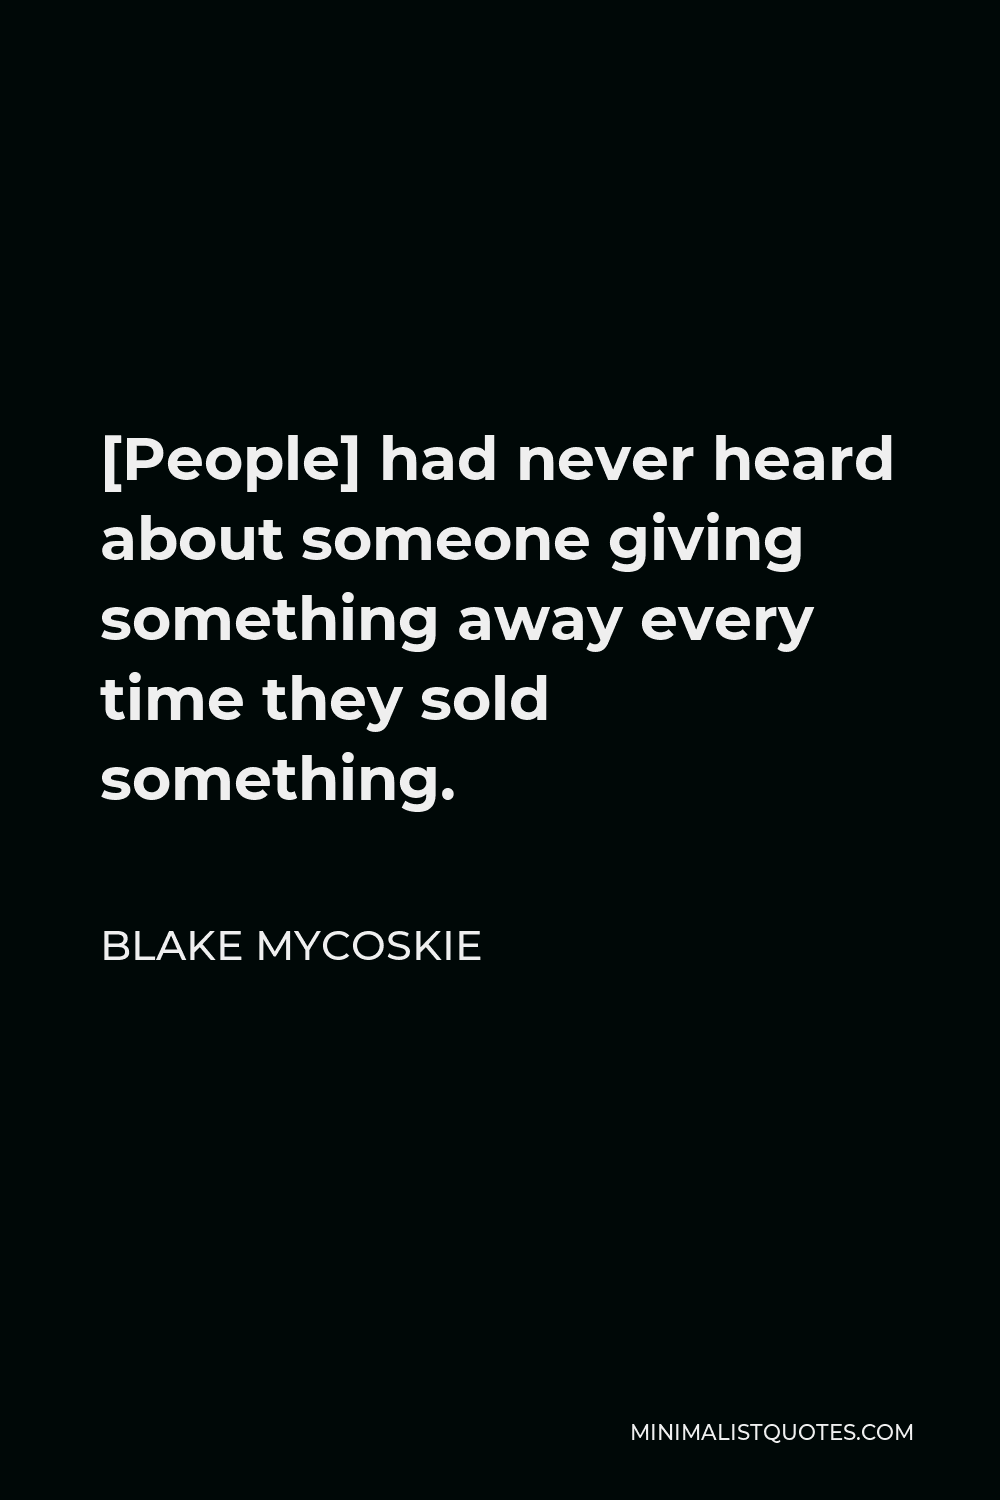 Blake Mycoskie Quote - [People] had never heard about someone giving something away every time they sold something.